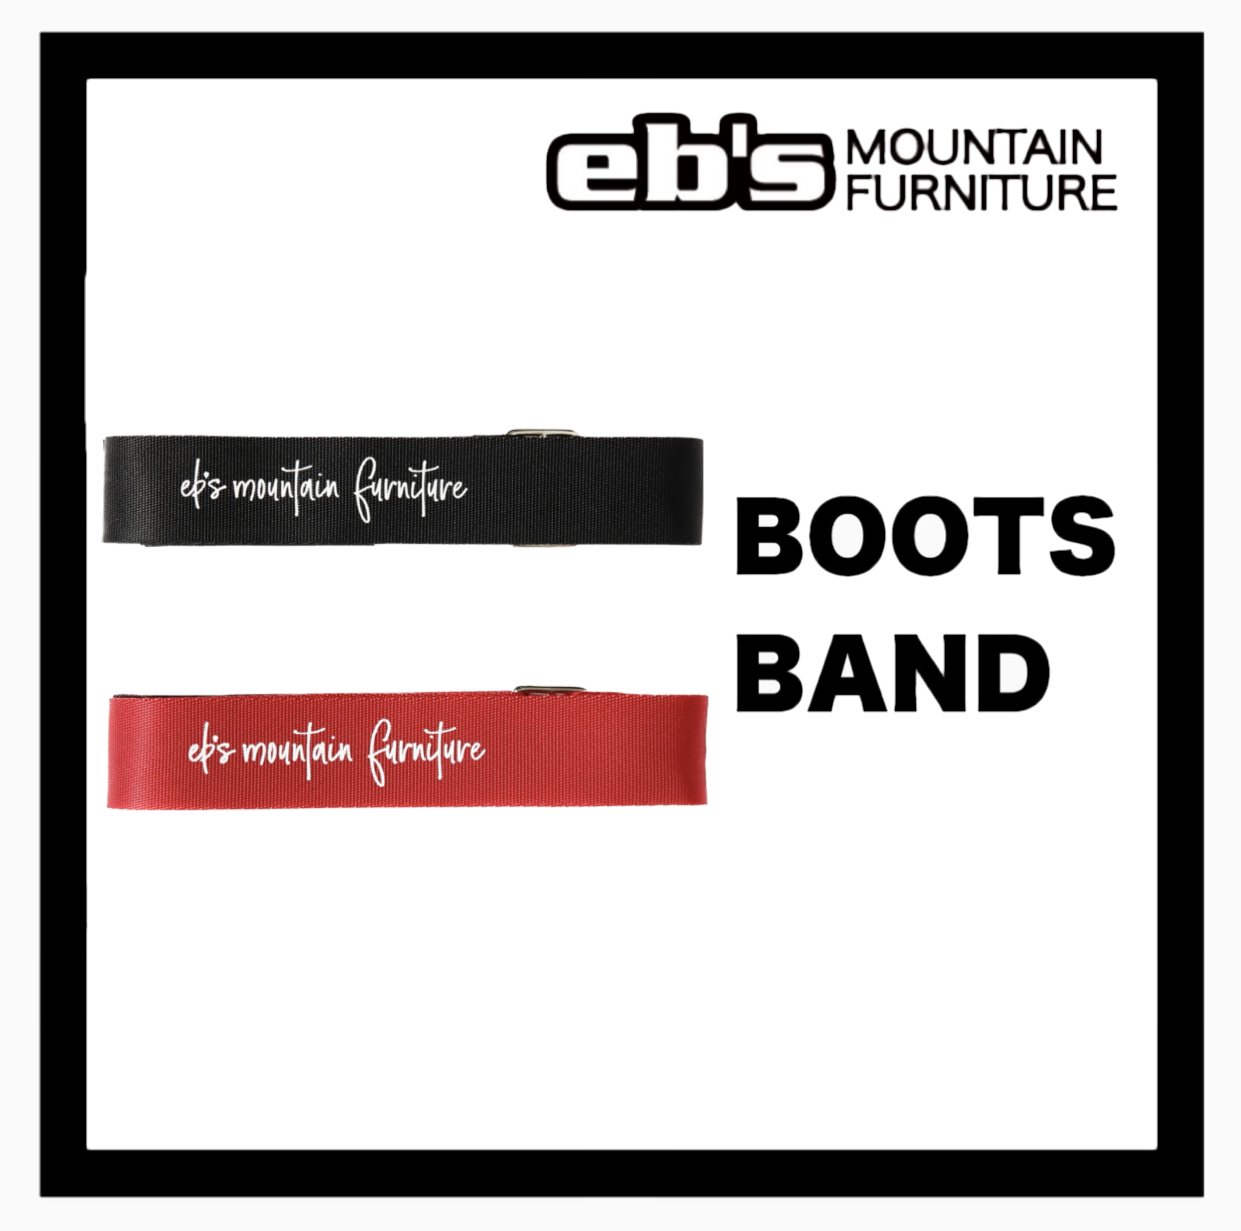 <img class='new_mark_img1' src='https://img.shop-pro.jp/img/new/icons14.gif' style='border:none;display:inline;margin:0px;padding:0px;width:auto;' />eb'sBOOTS BAND